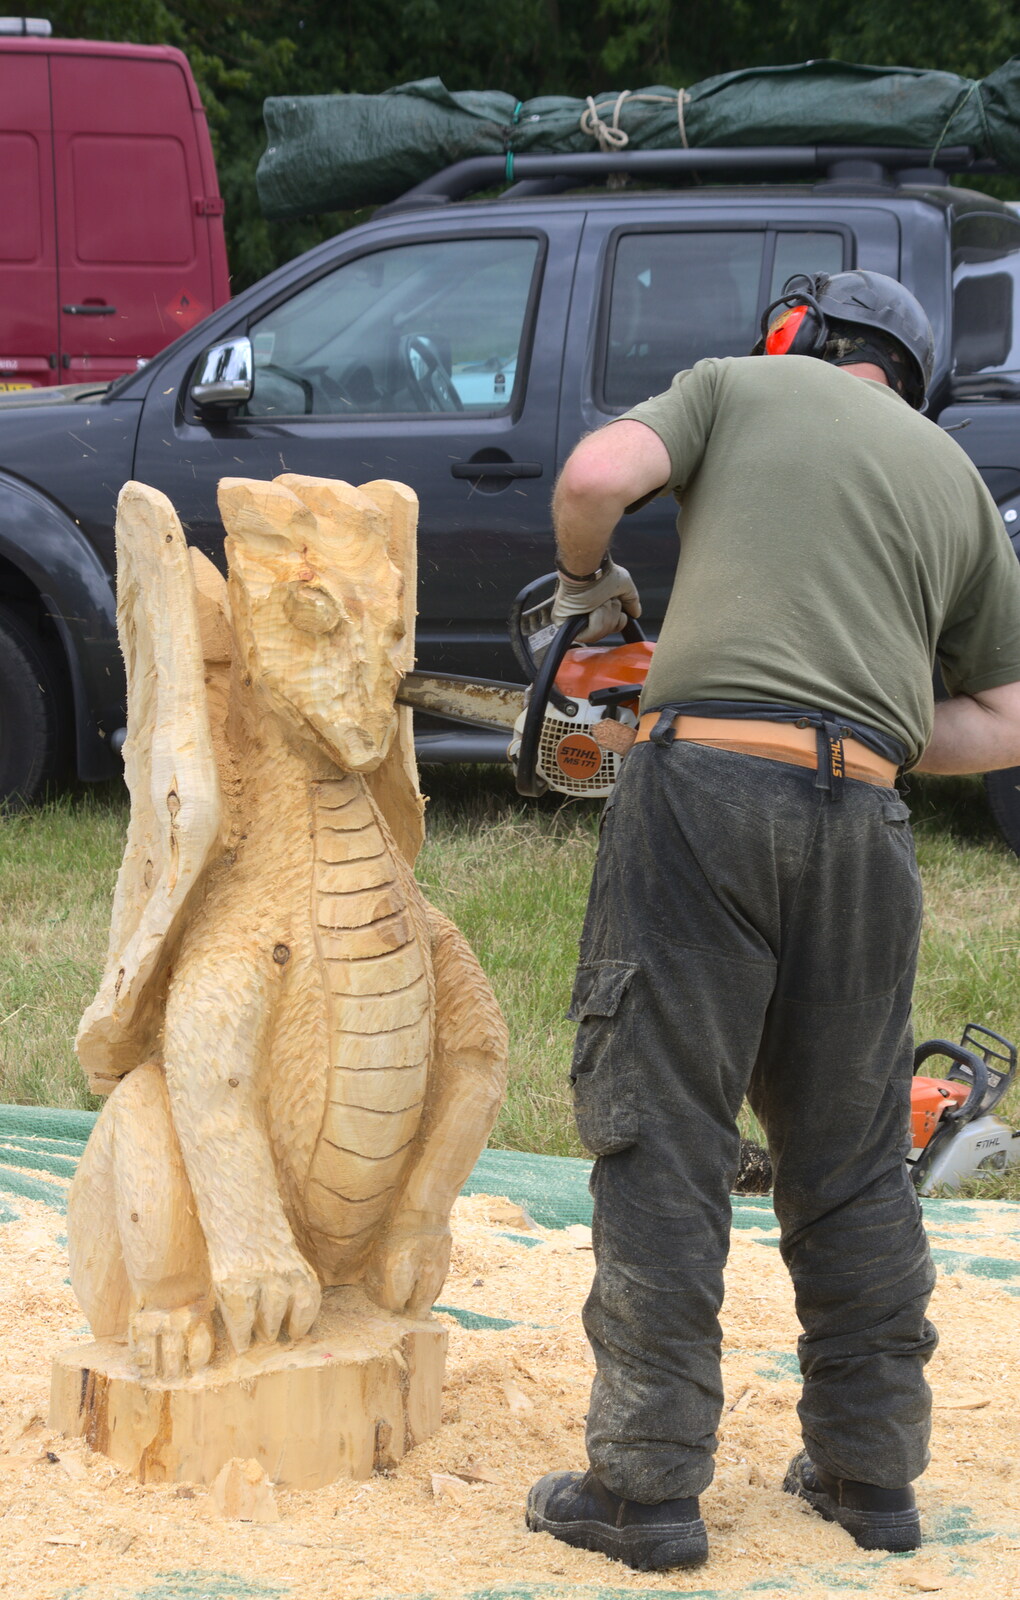 Impressive chain-saw sculpture from A Vintage Tractorey Sort of Day, Palgrave, Suffolk - 21st June 2015